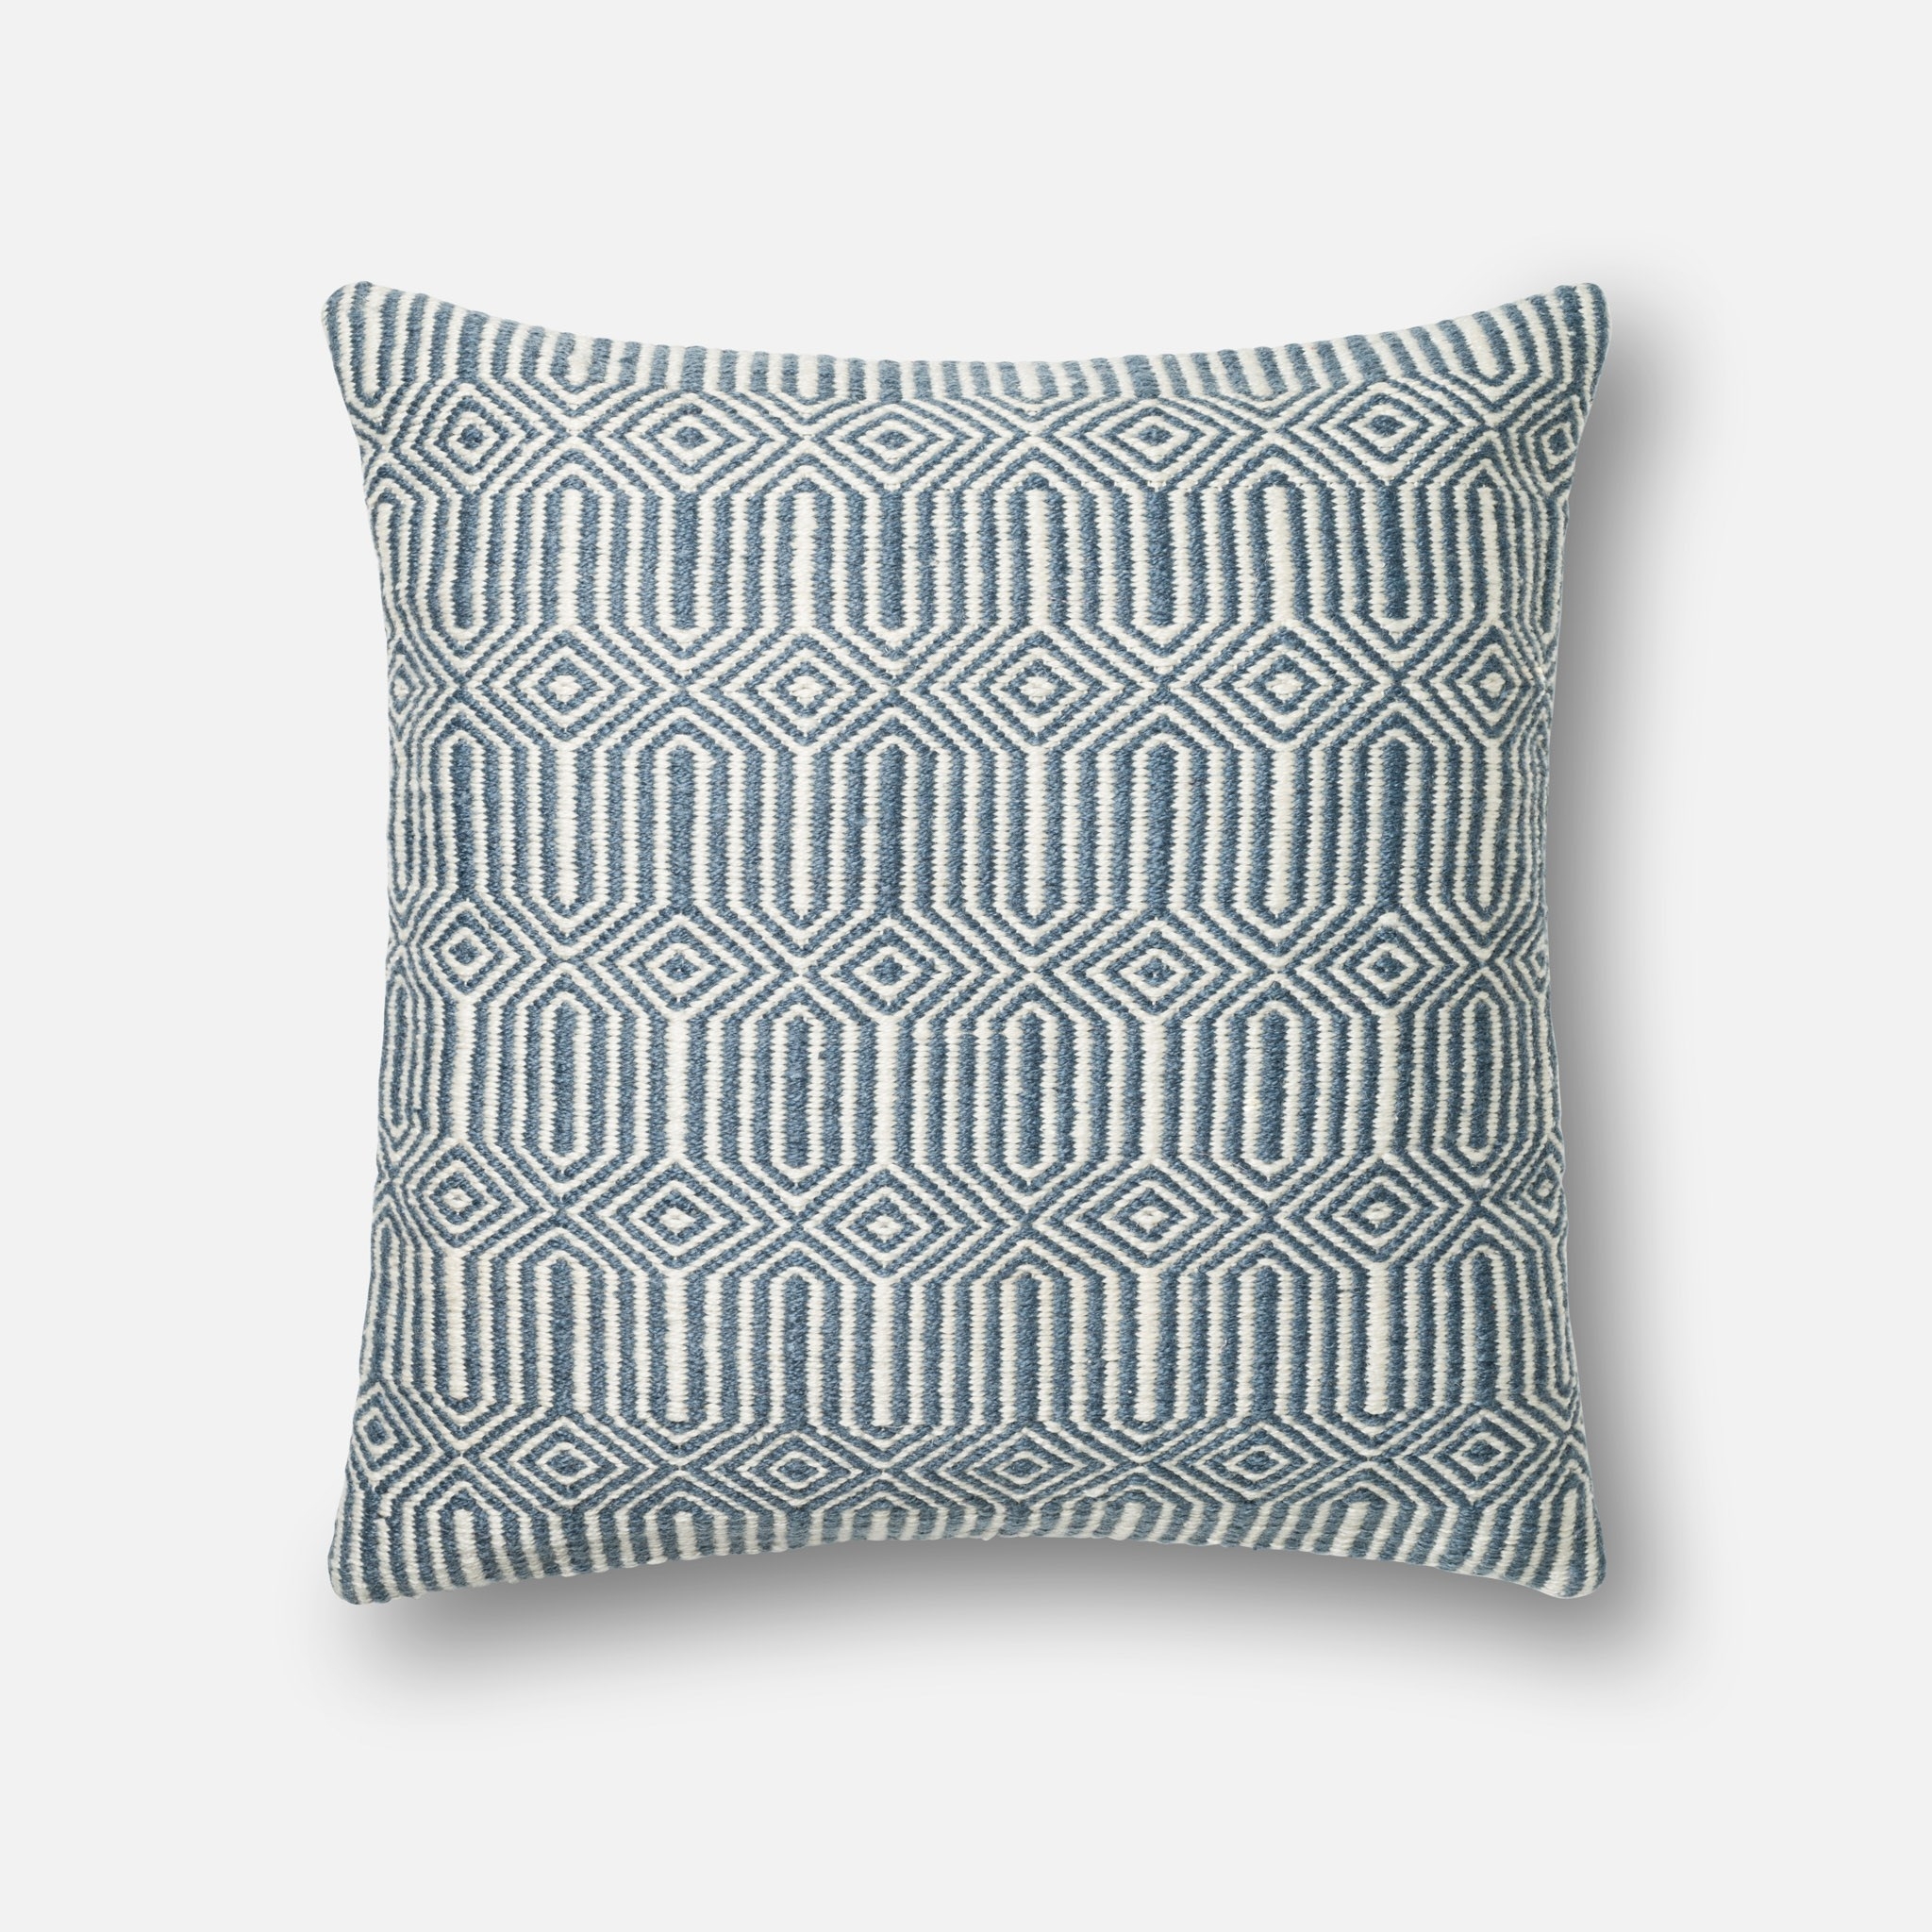 Indoor/Outdoor Geometric Throw Pillow Cover, Blue & Ivory, 22" x 22" - Image 0